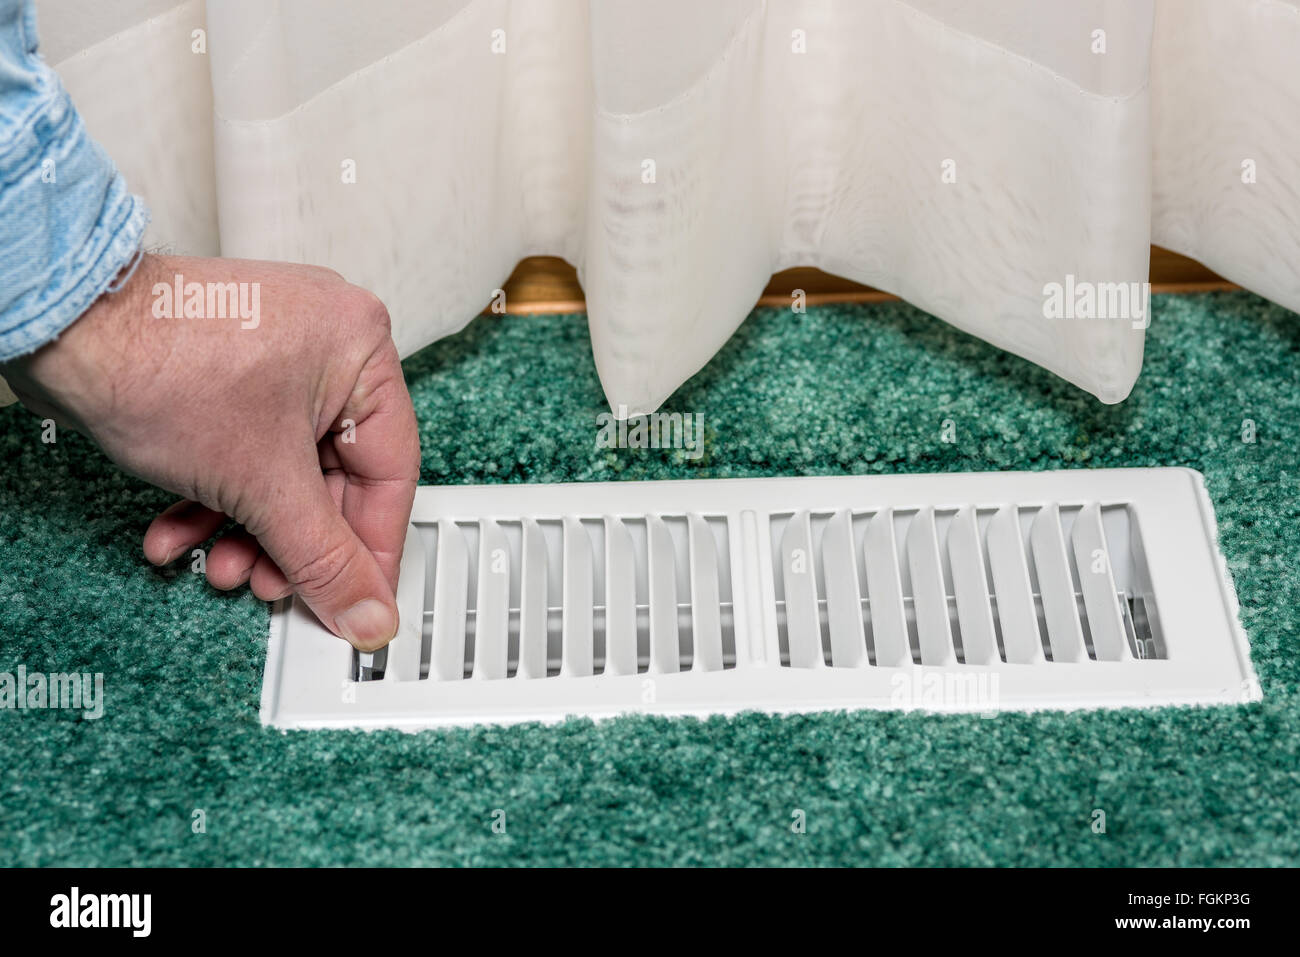 Adjusting the louvers of a floor register Stock Photo